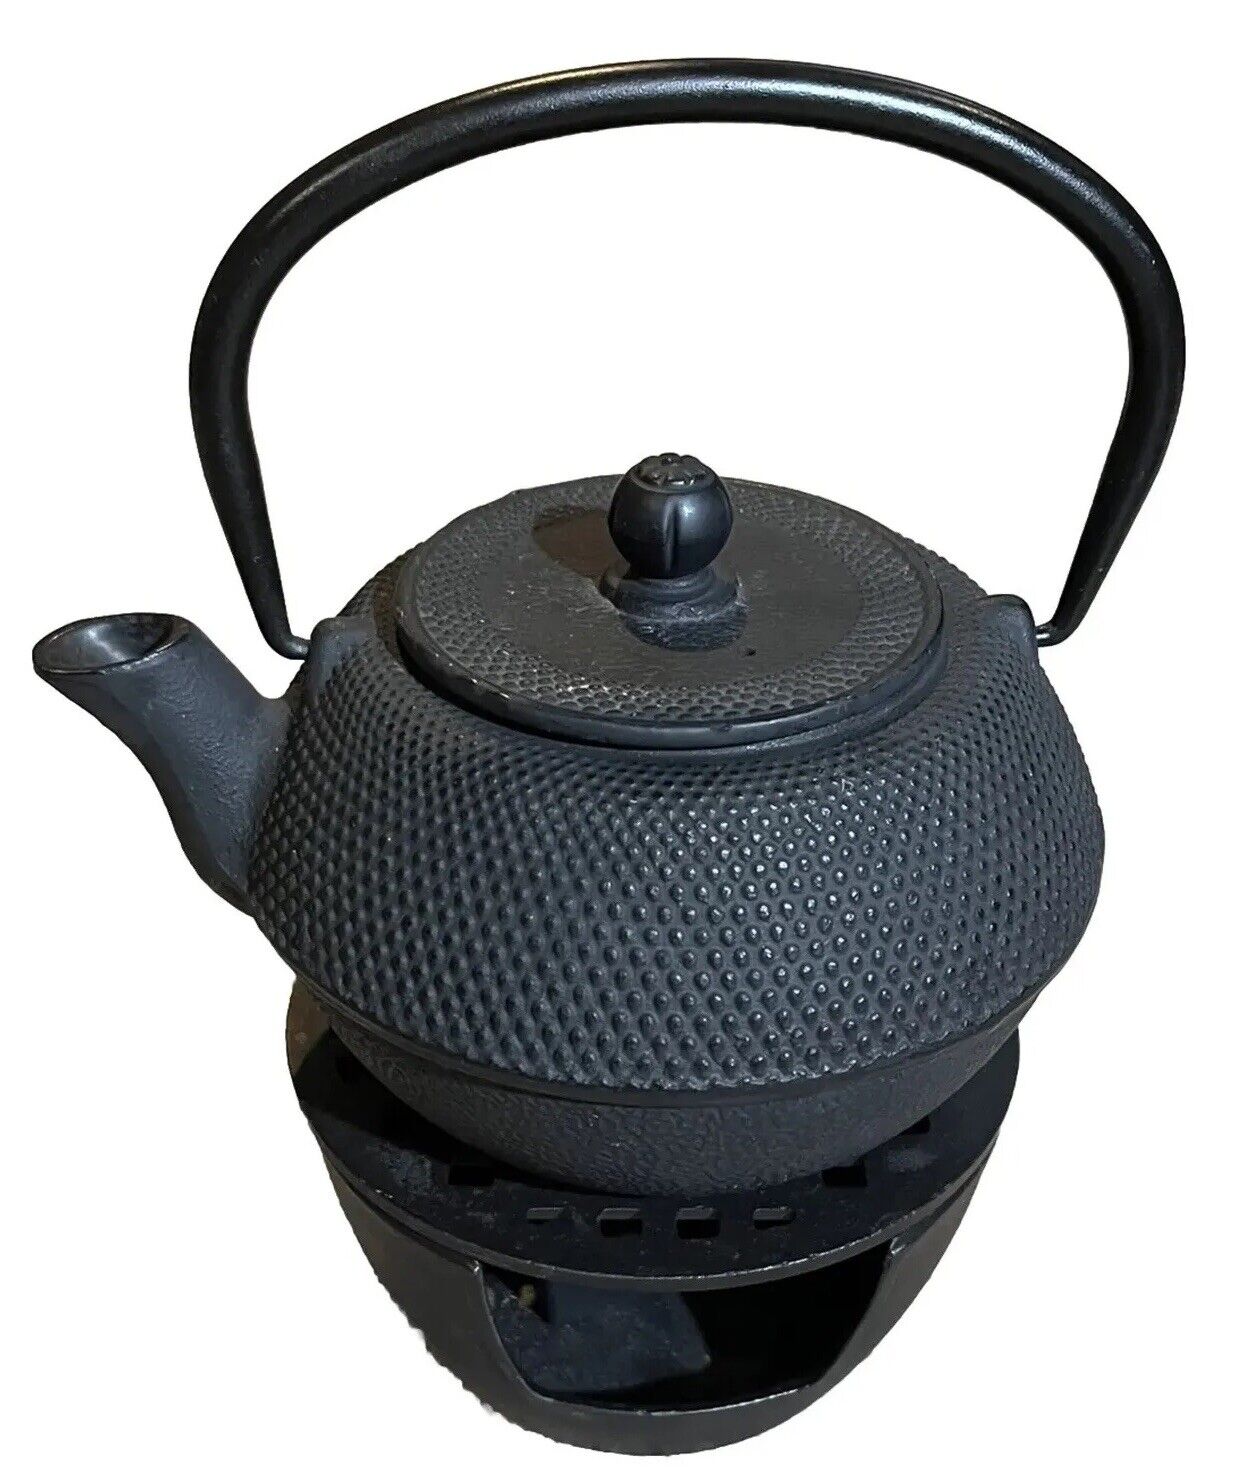 The Republic Of Tea Cast Iron Tea Pot Asian Inspired Black With Candle Stove